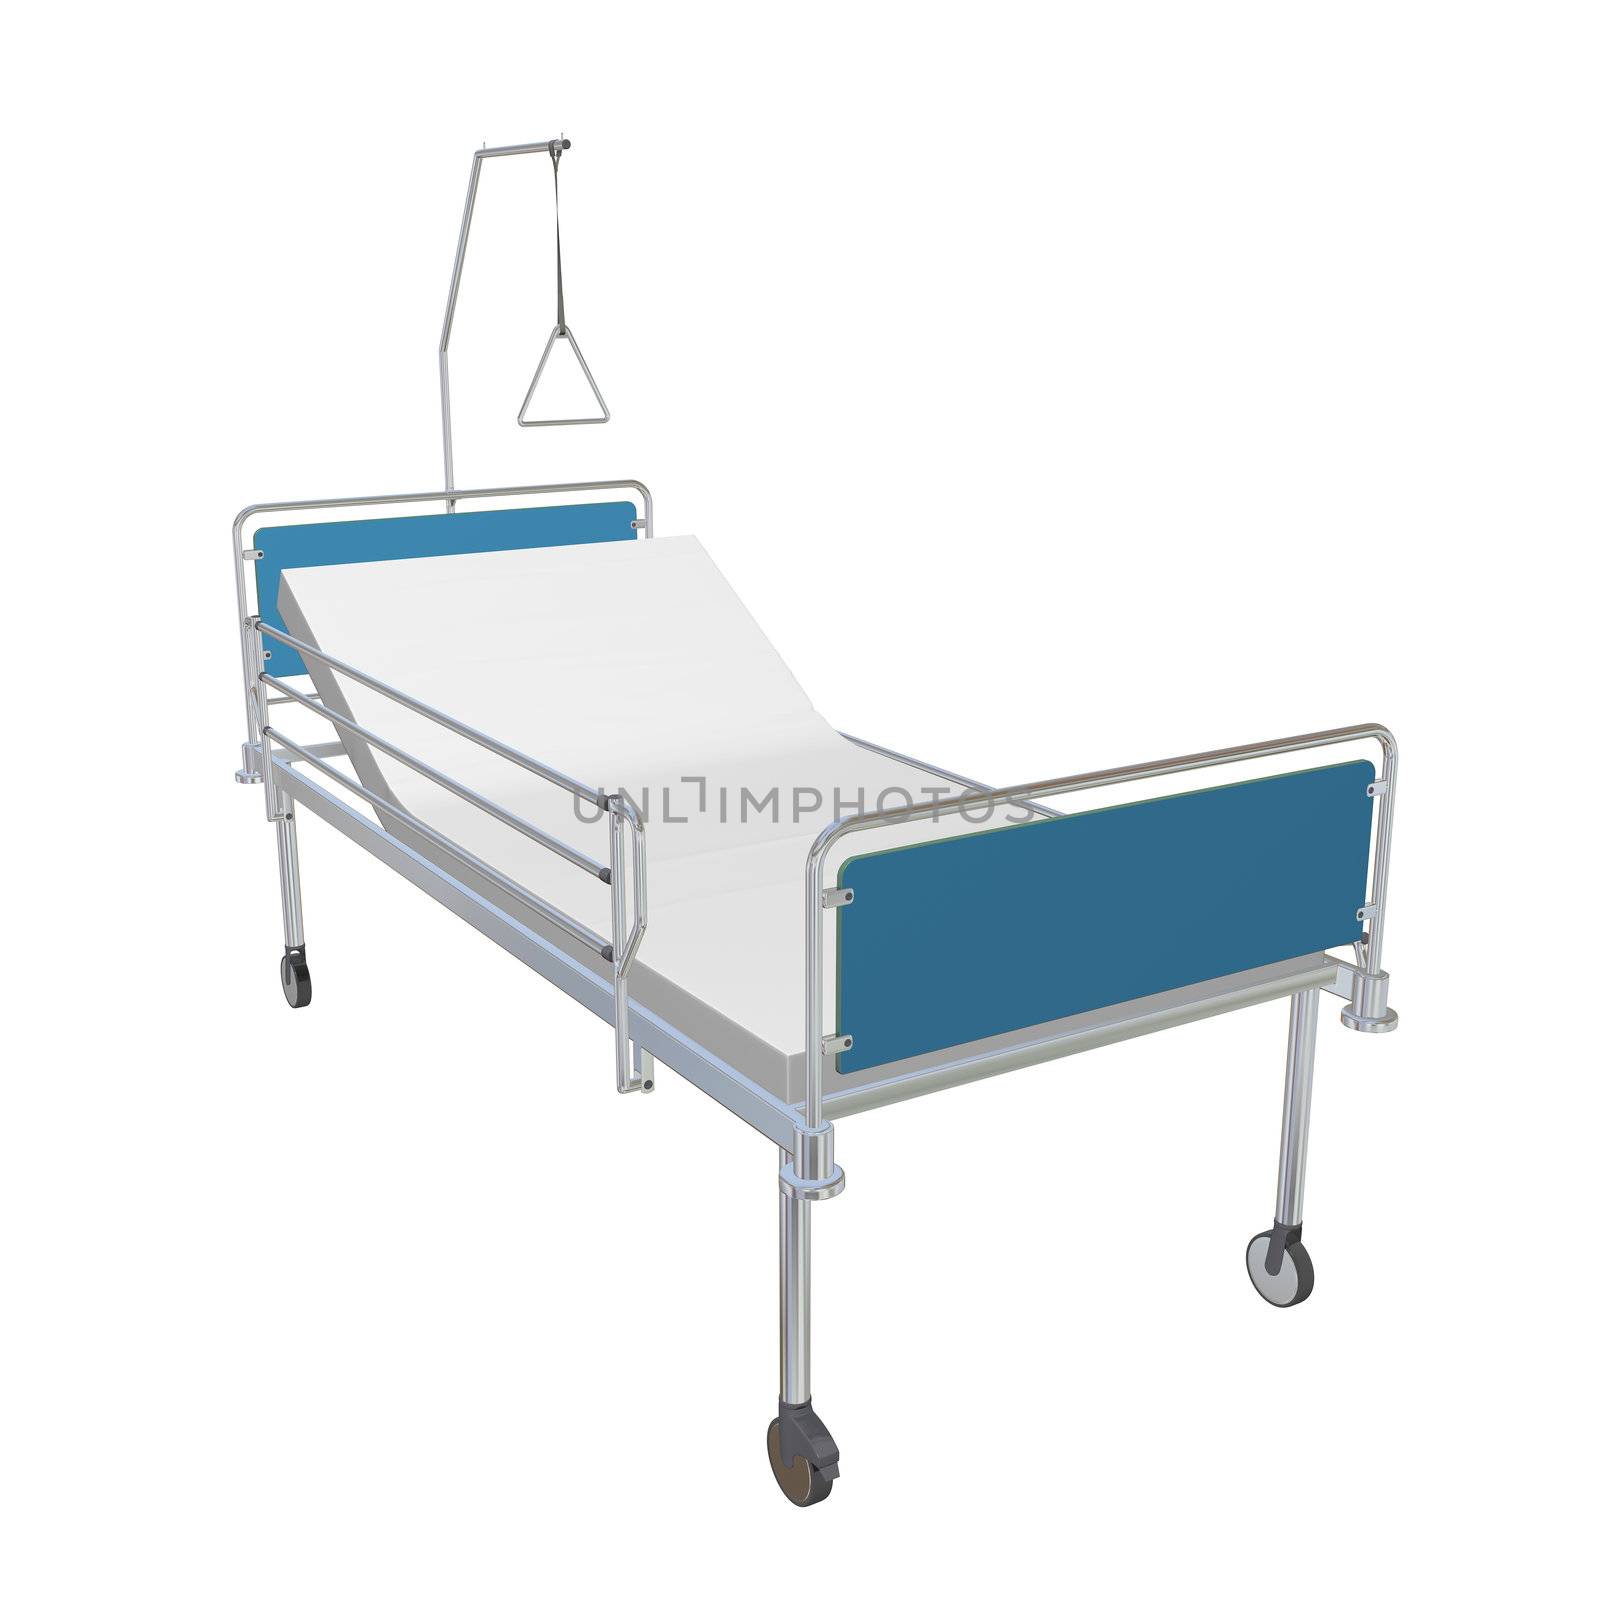 Blue and chrome mobile hospital bed with recliner, 3d illustration, isolated against a white background